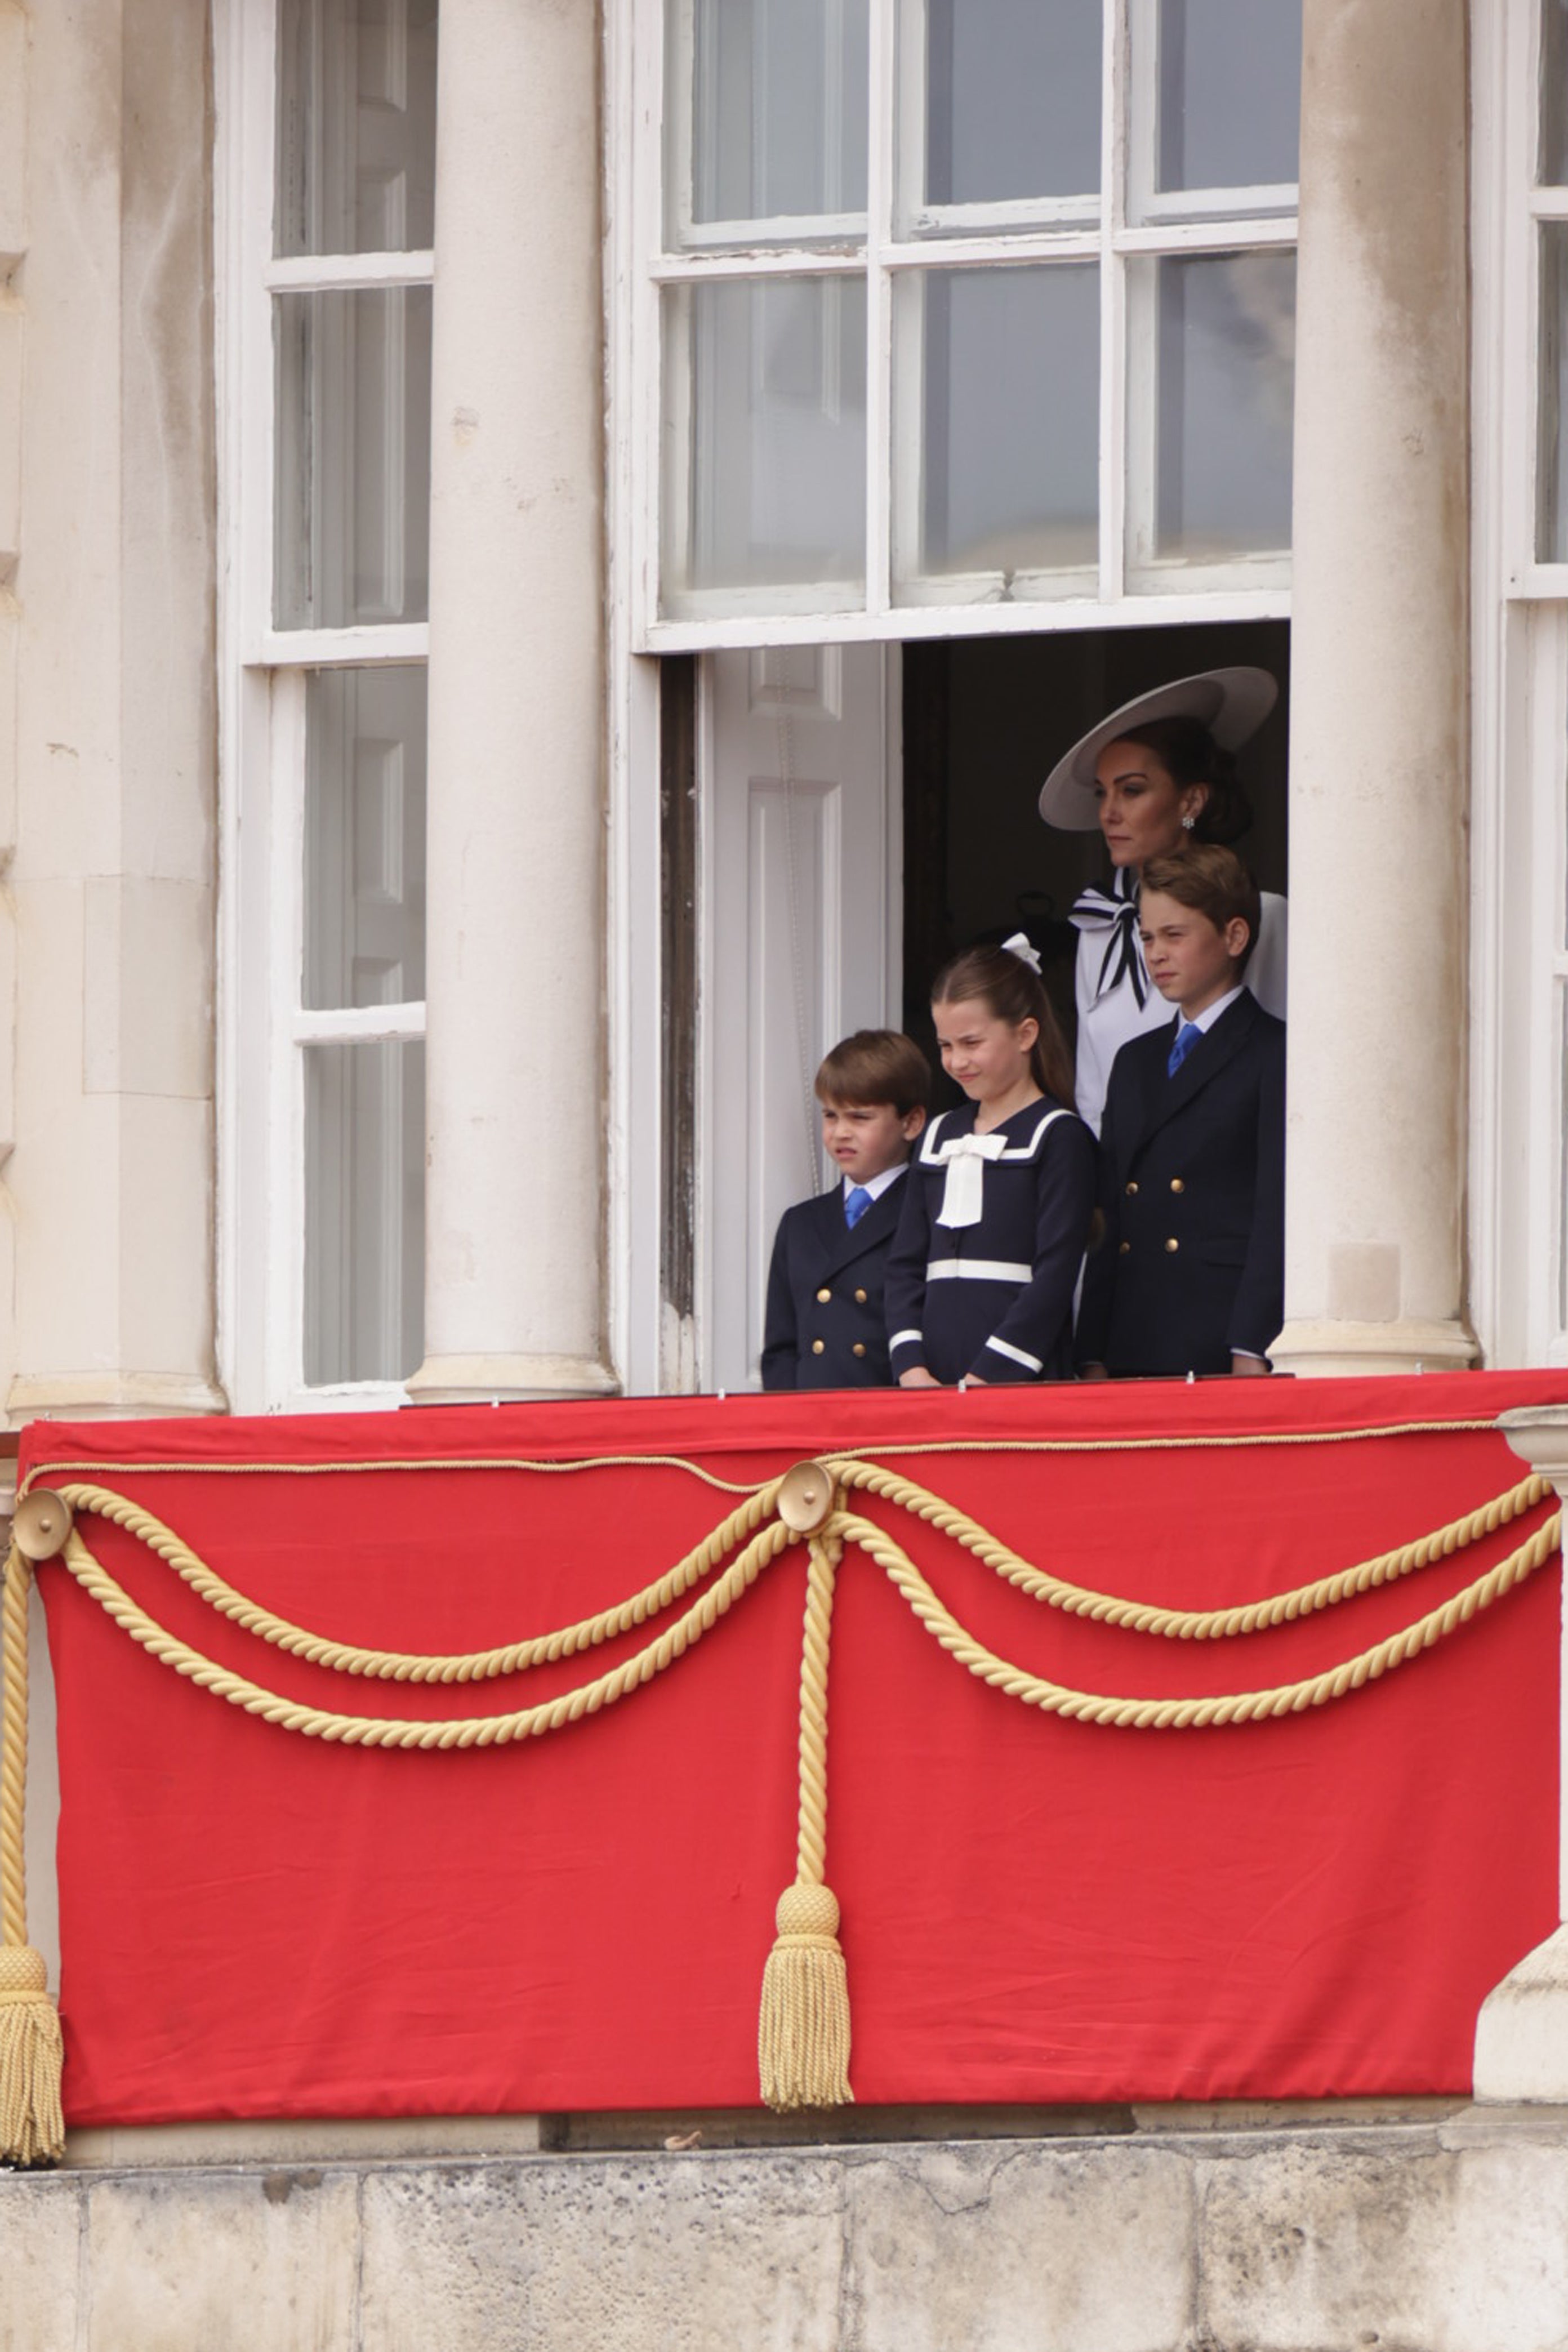 Kate watched the ceremony with her three children from a window at Horse Guards Parade